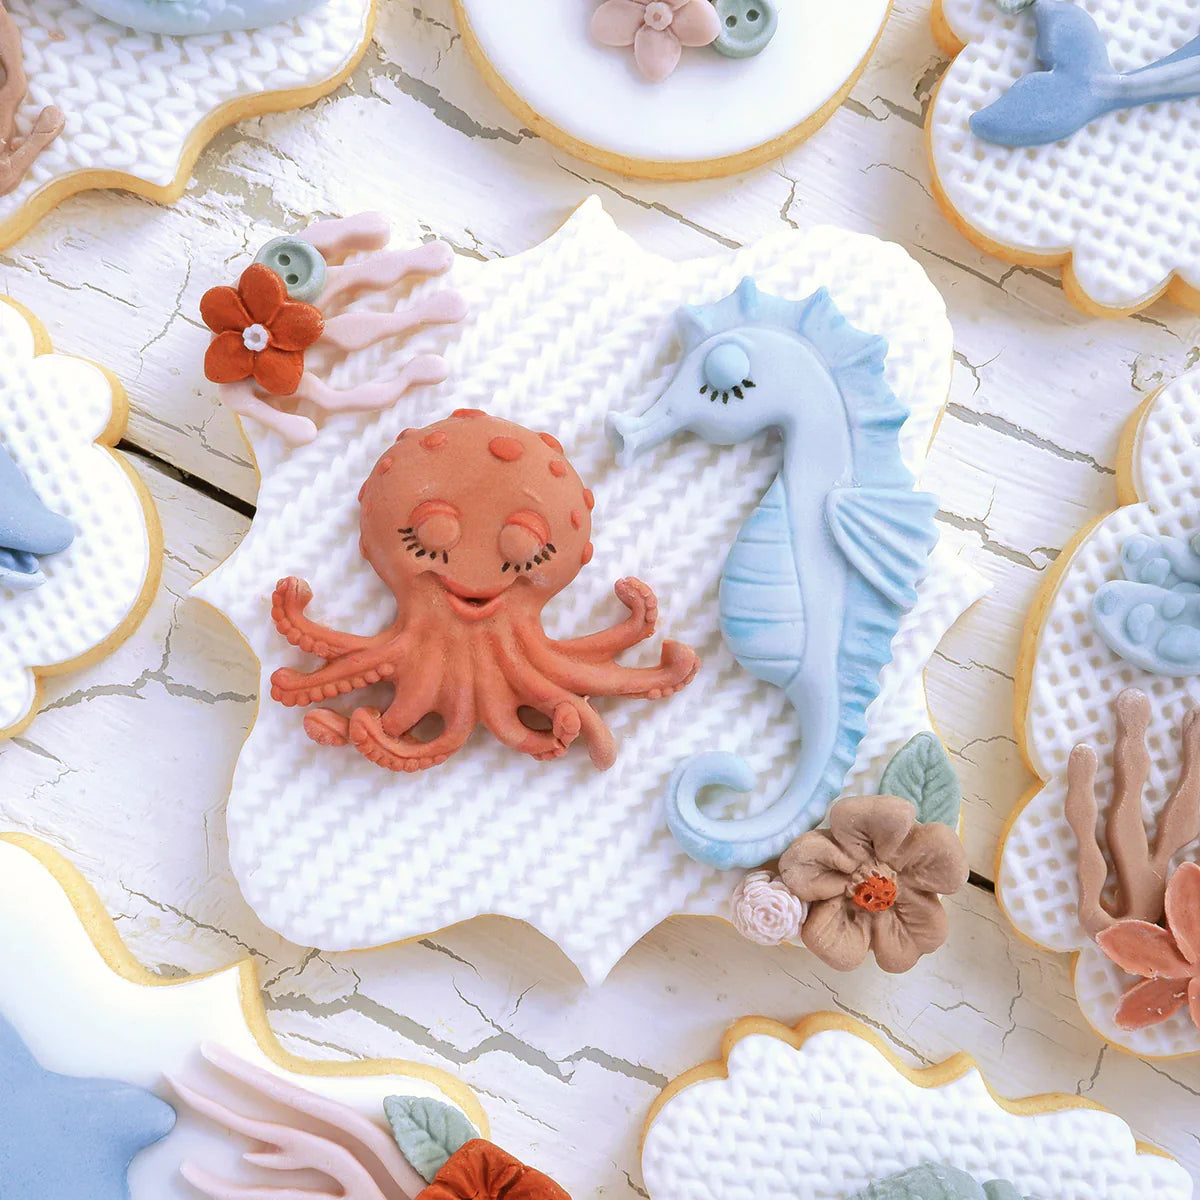 Octopus and Seahorse Silicone Mould